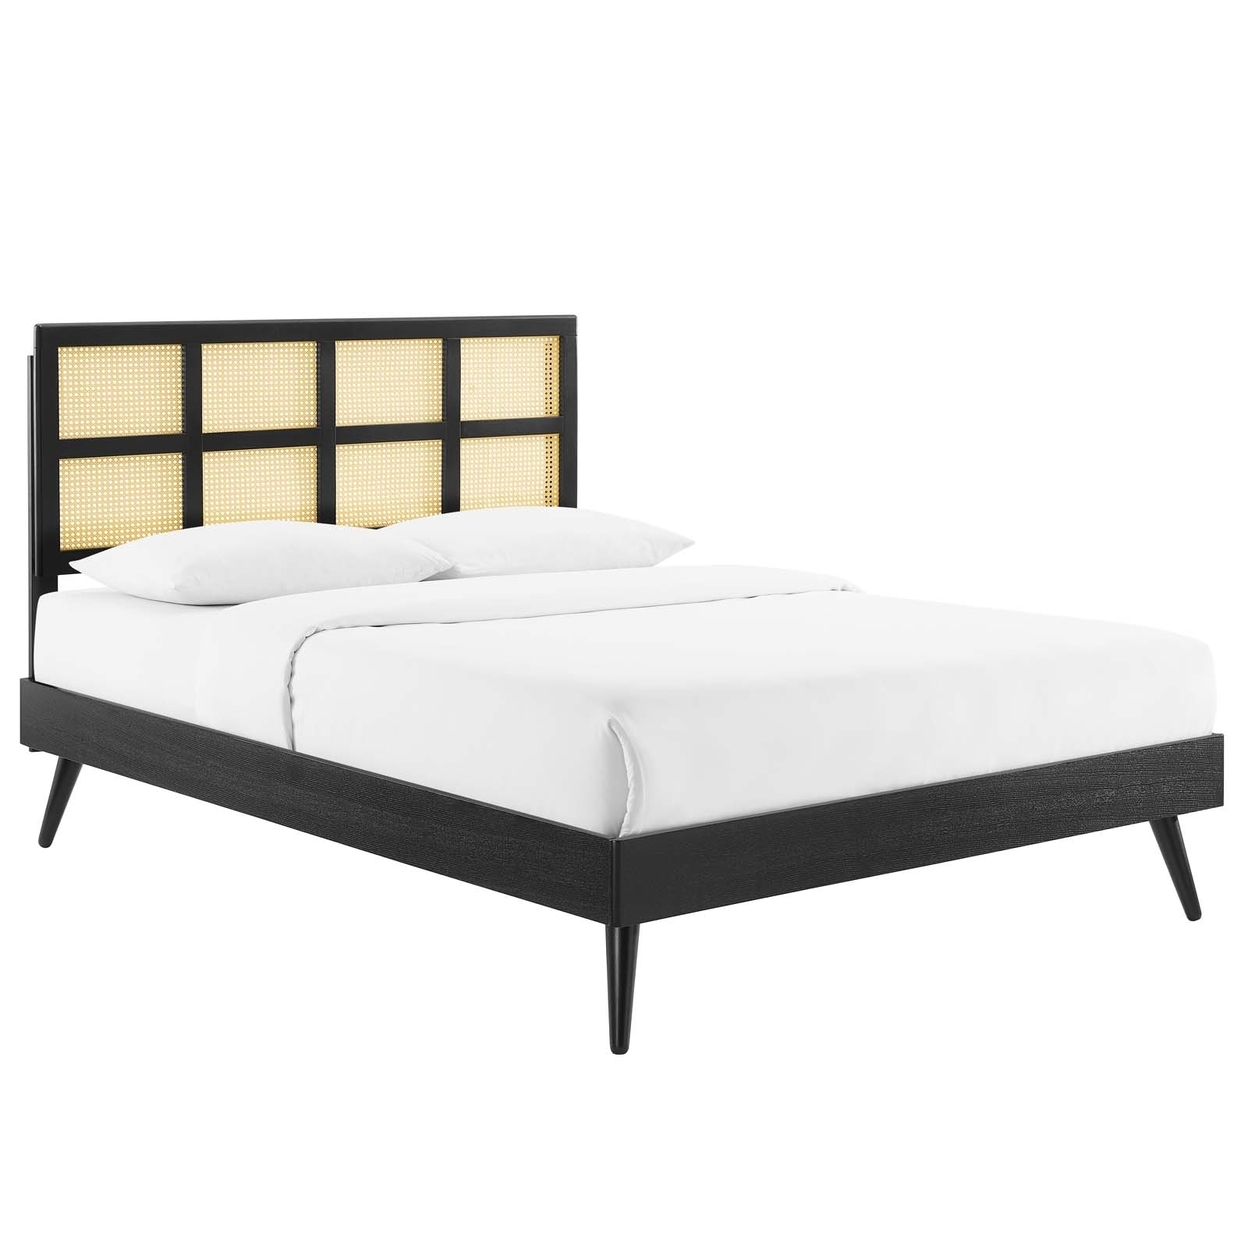 Sidney Cane And Wood Queen Platform Bed With Splayed Legs, Black